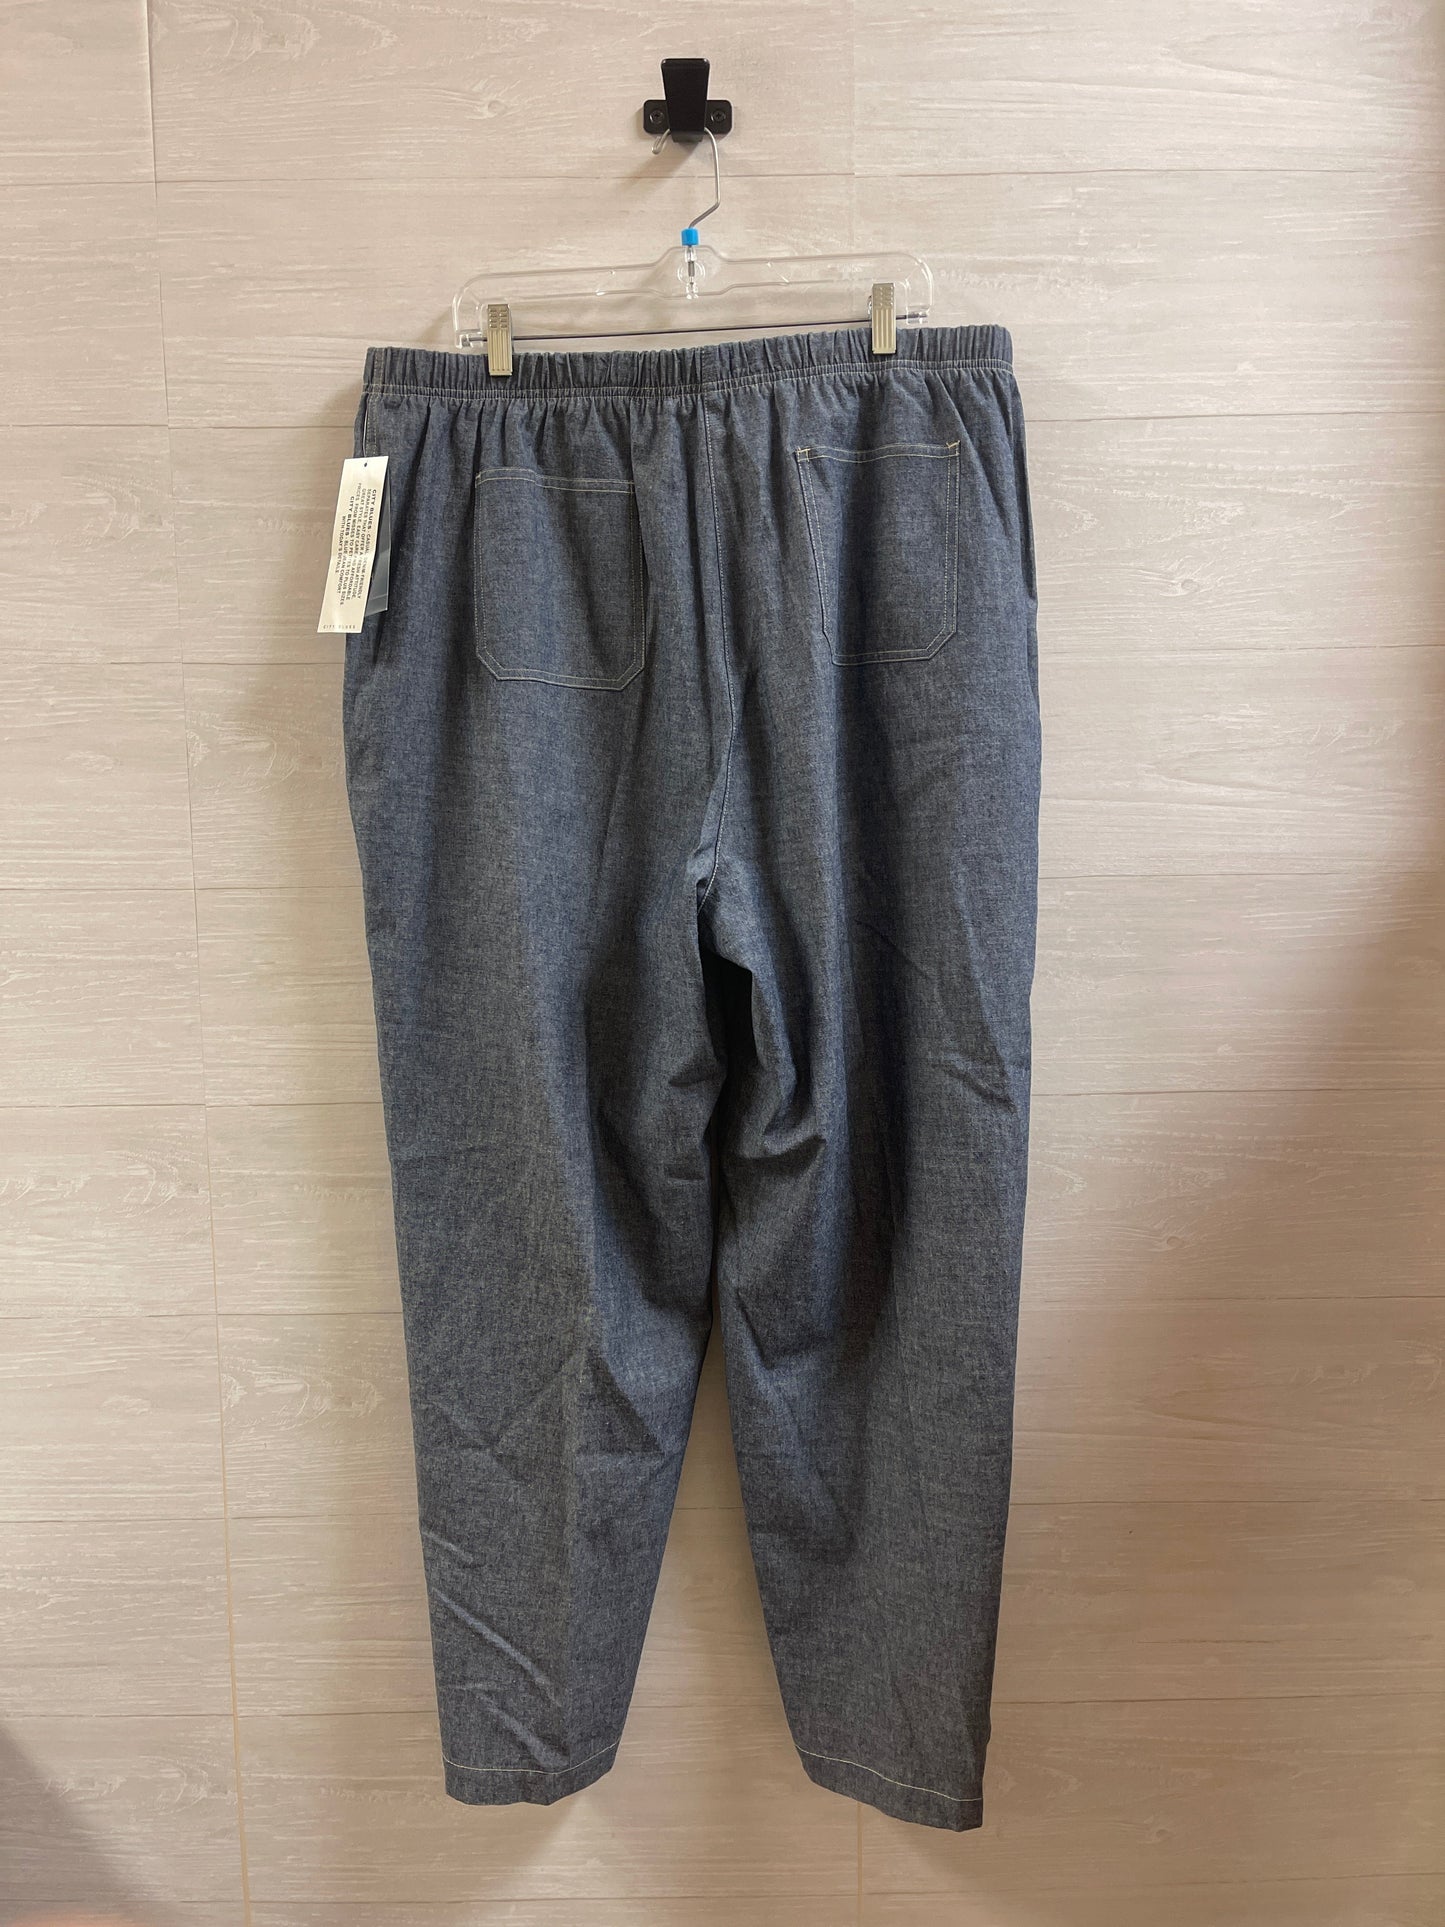 Pants Ankle By Catherines  Size: 26